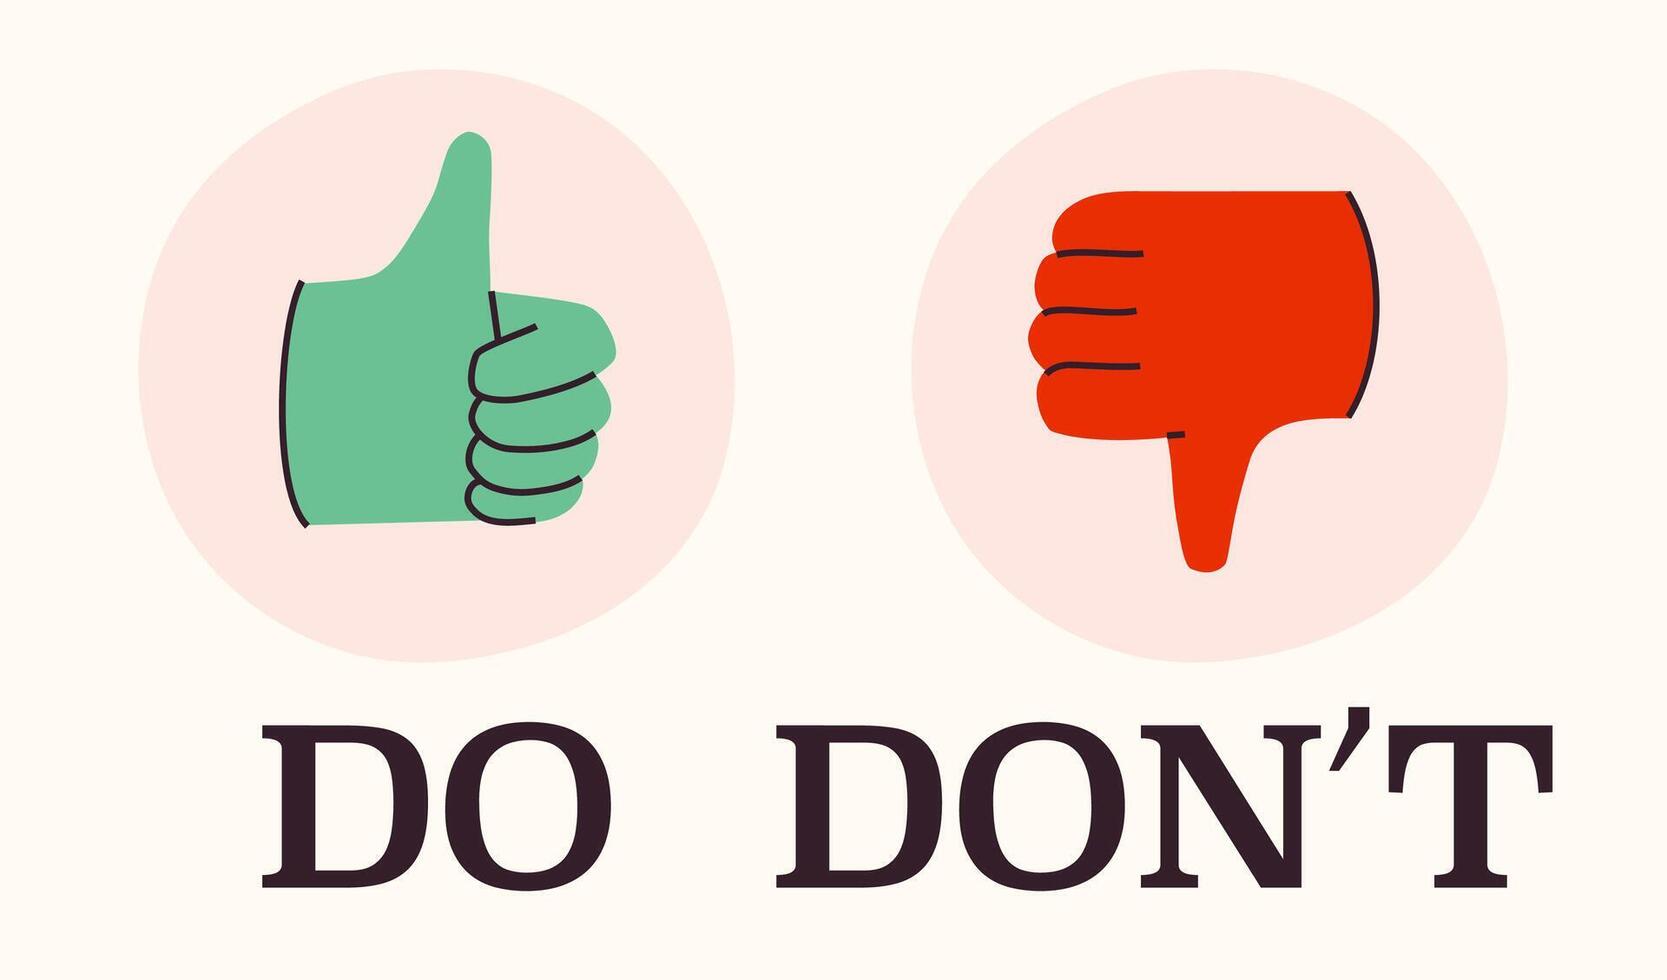 Do and dont icon hand drawn style vector